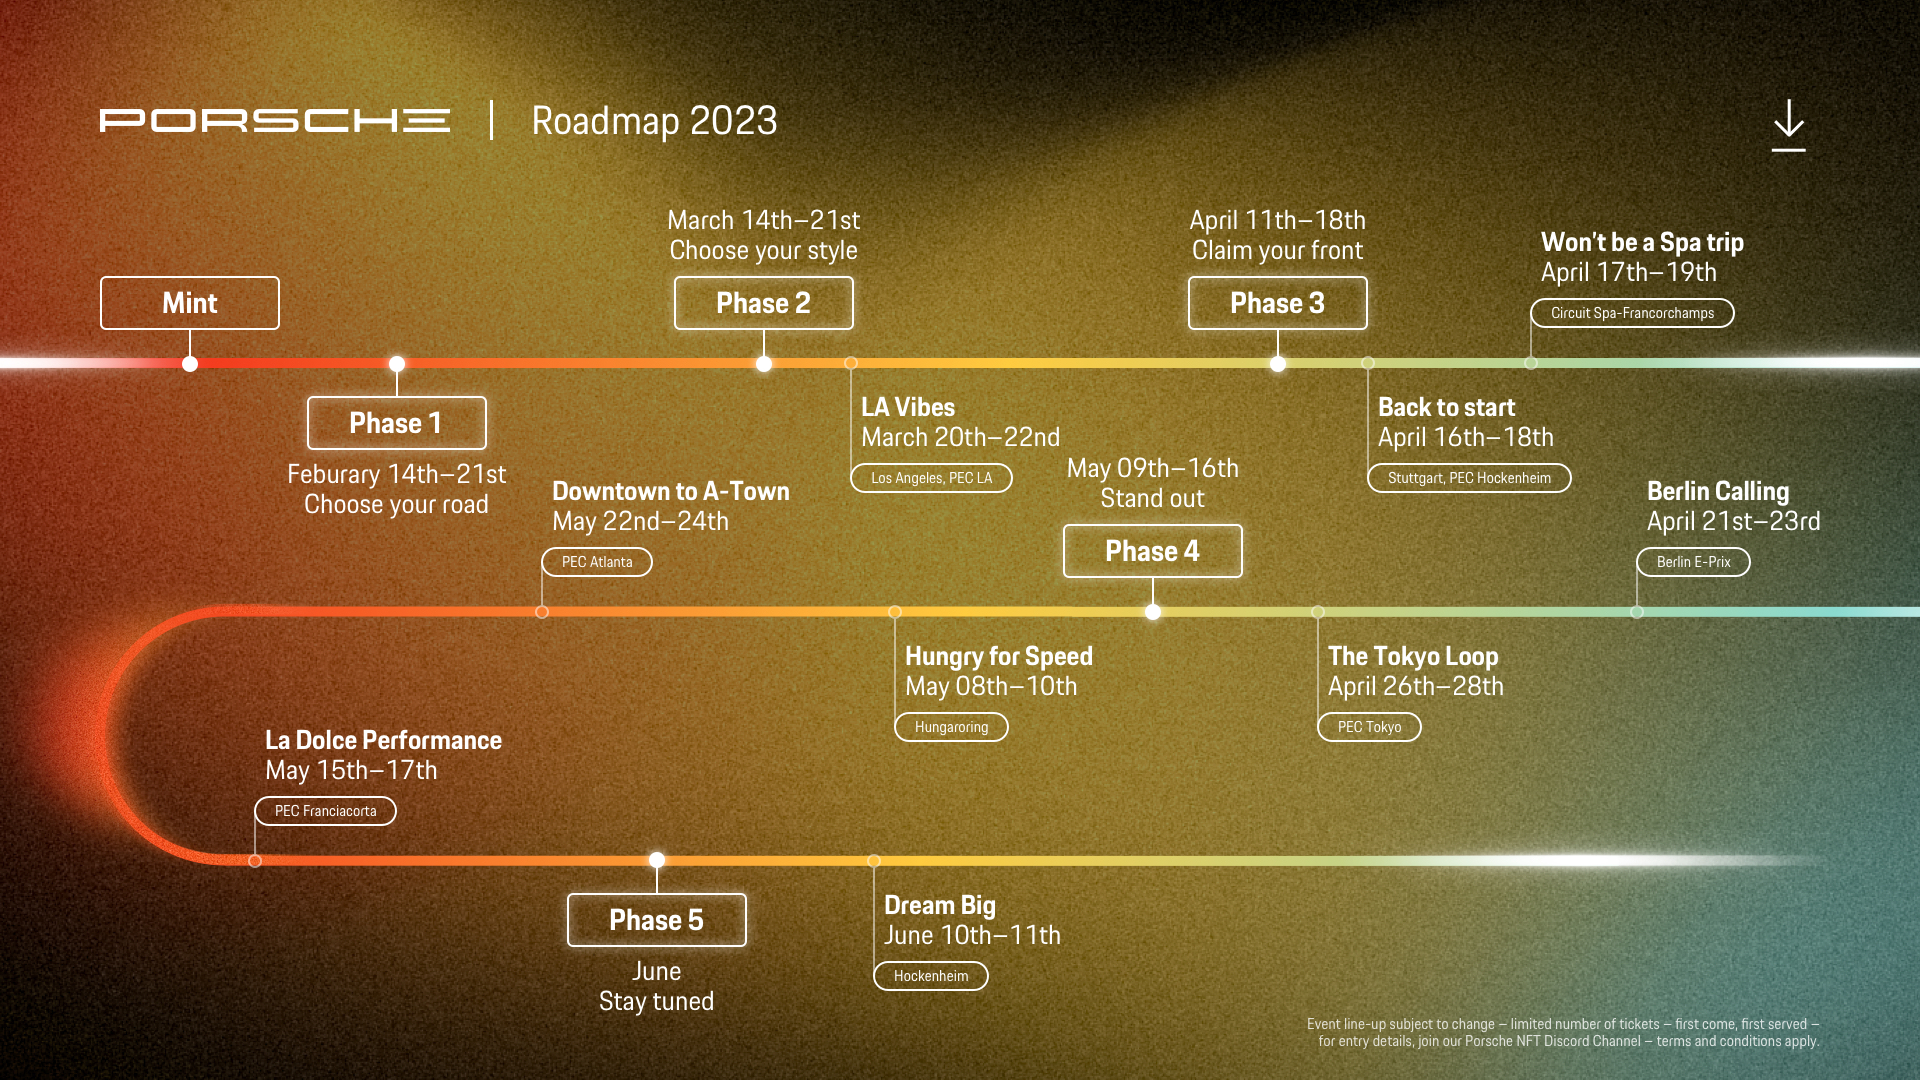 Porsche Web3 roadmap with text highlighting mint and phases timeline